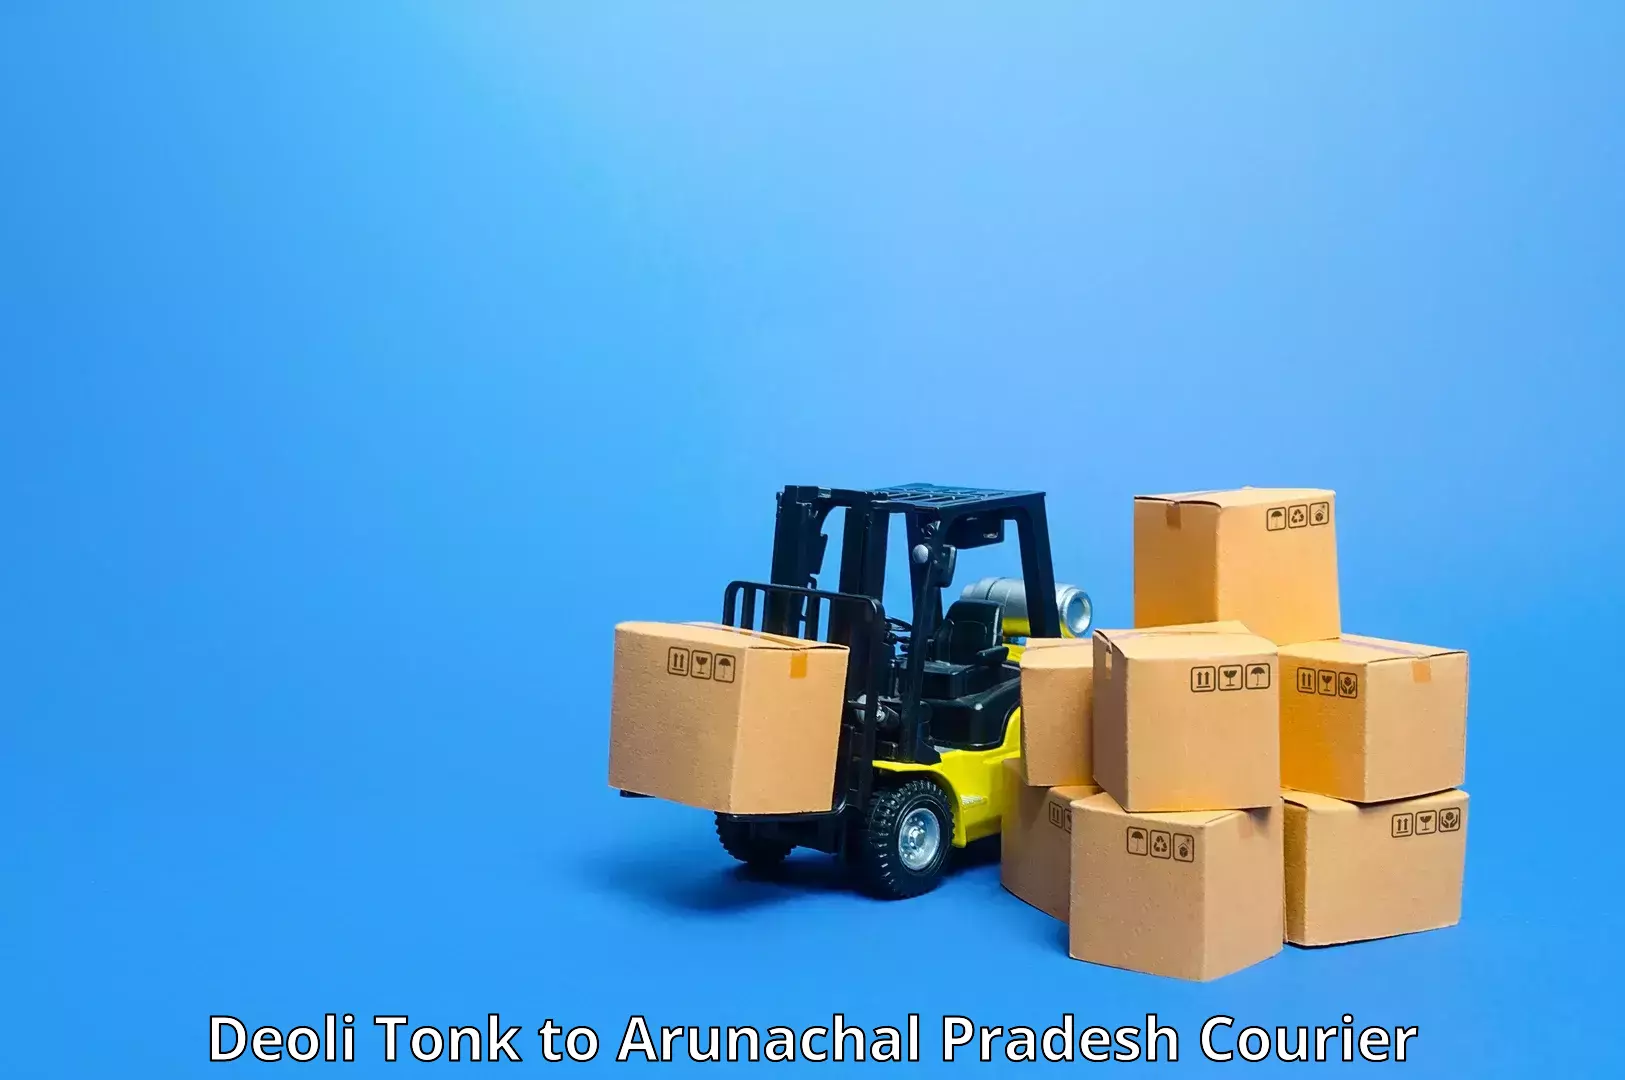 Reliable parcel services in Deoli Tonk to Lohit